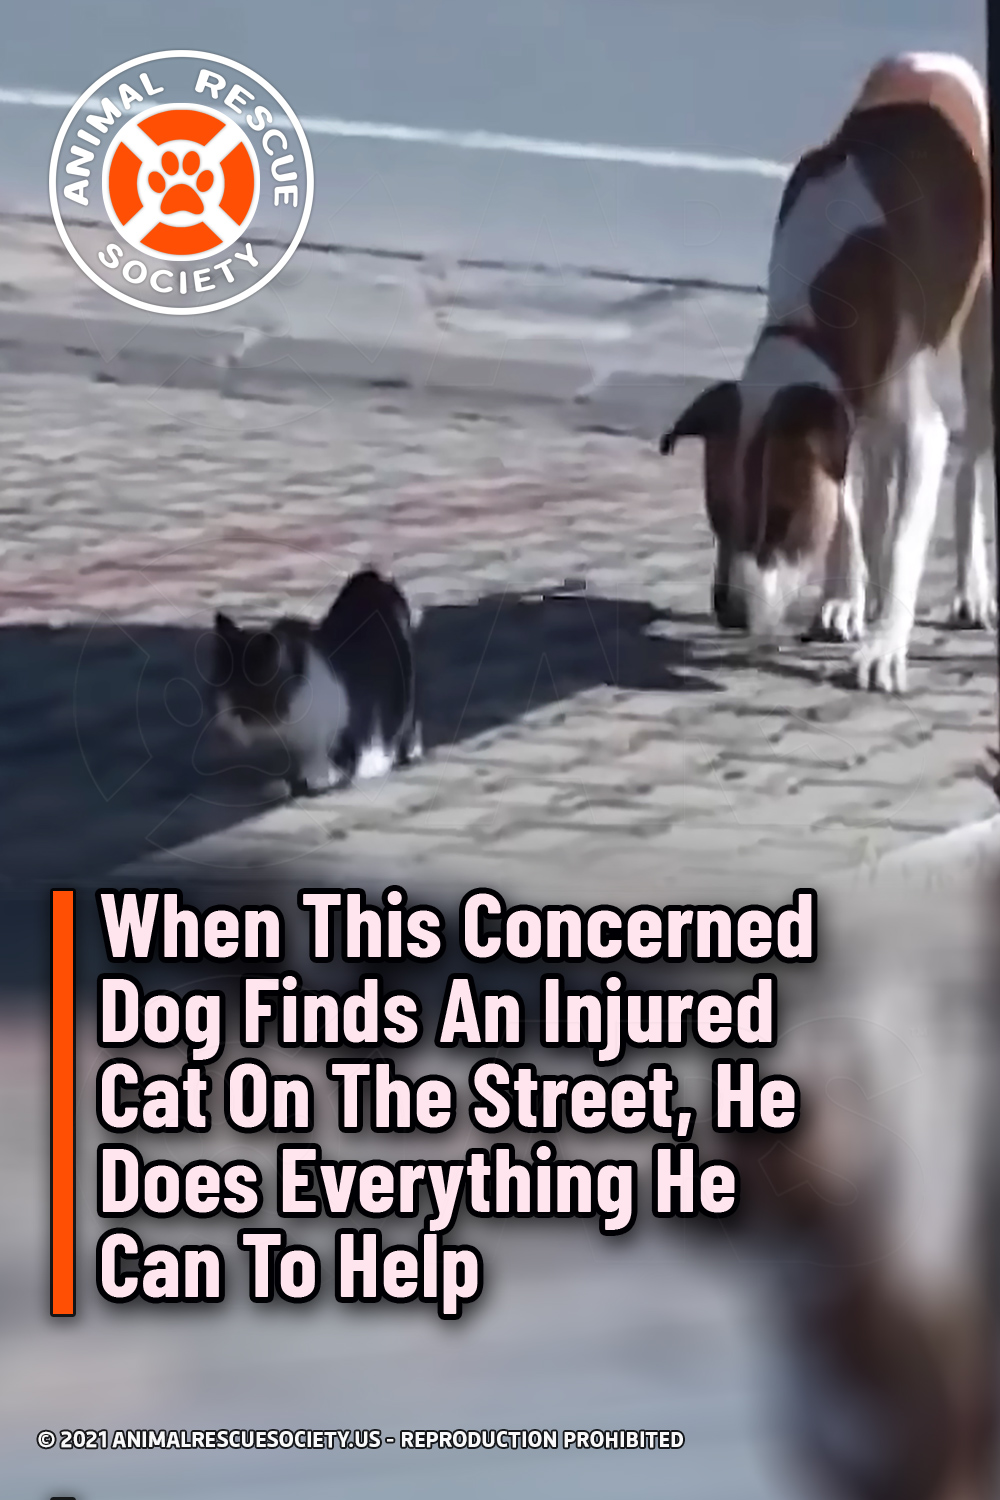 When This Concerned Dog Finds An Injured Cat On The Street, He Does Everything He Can To Help